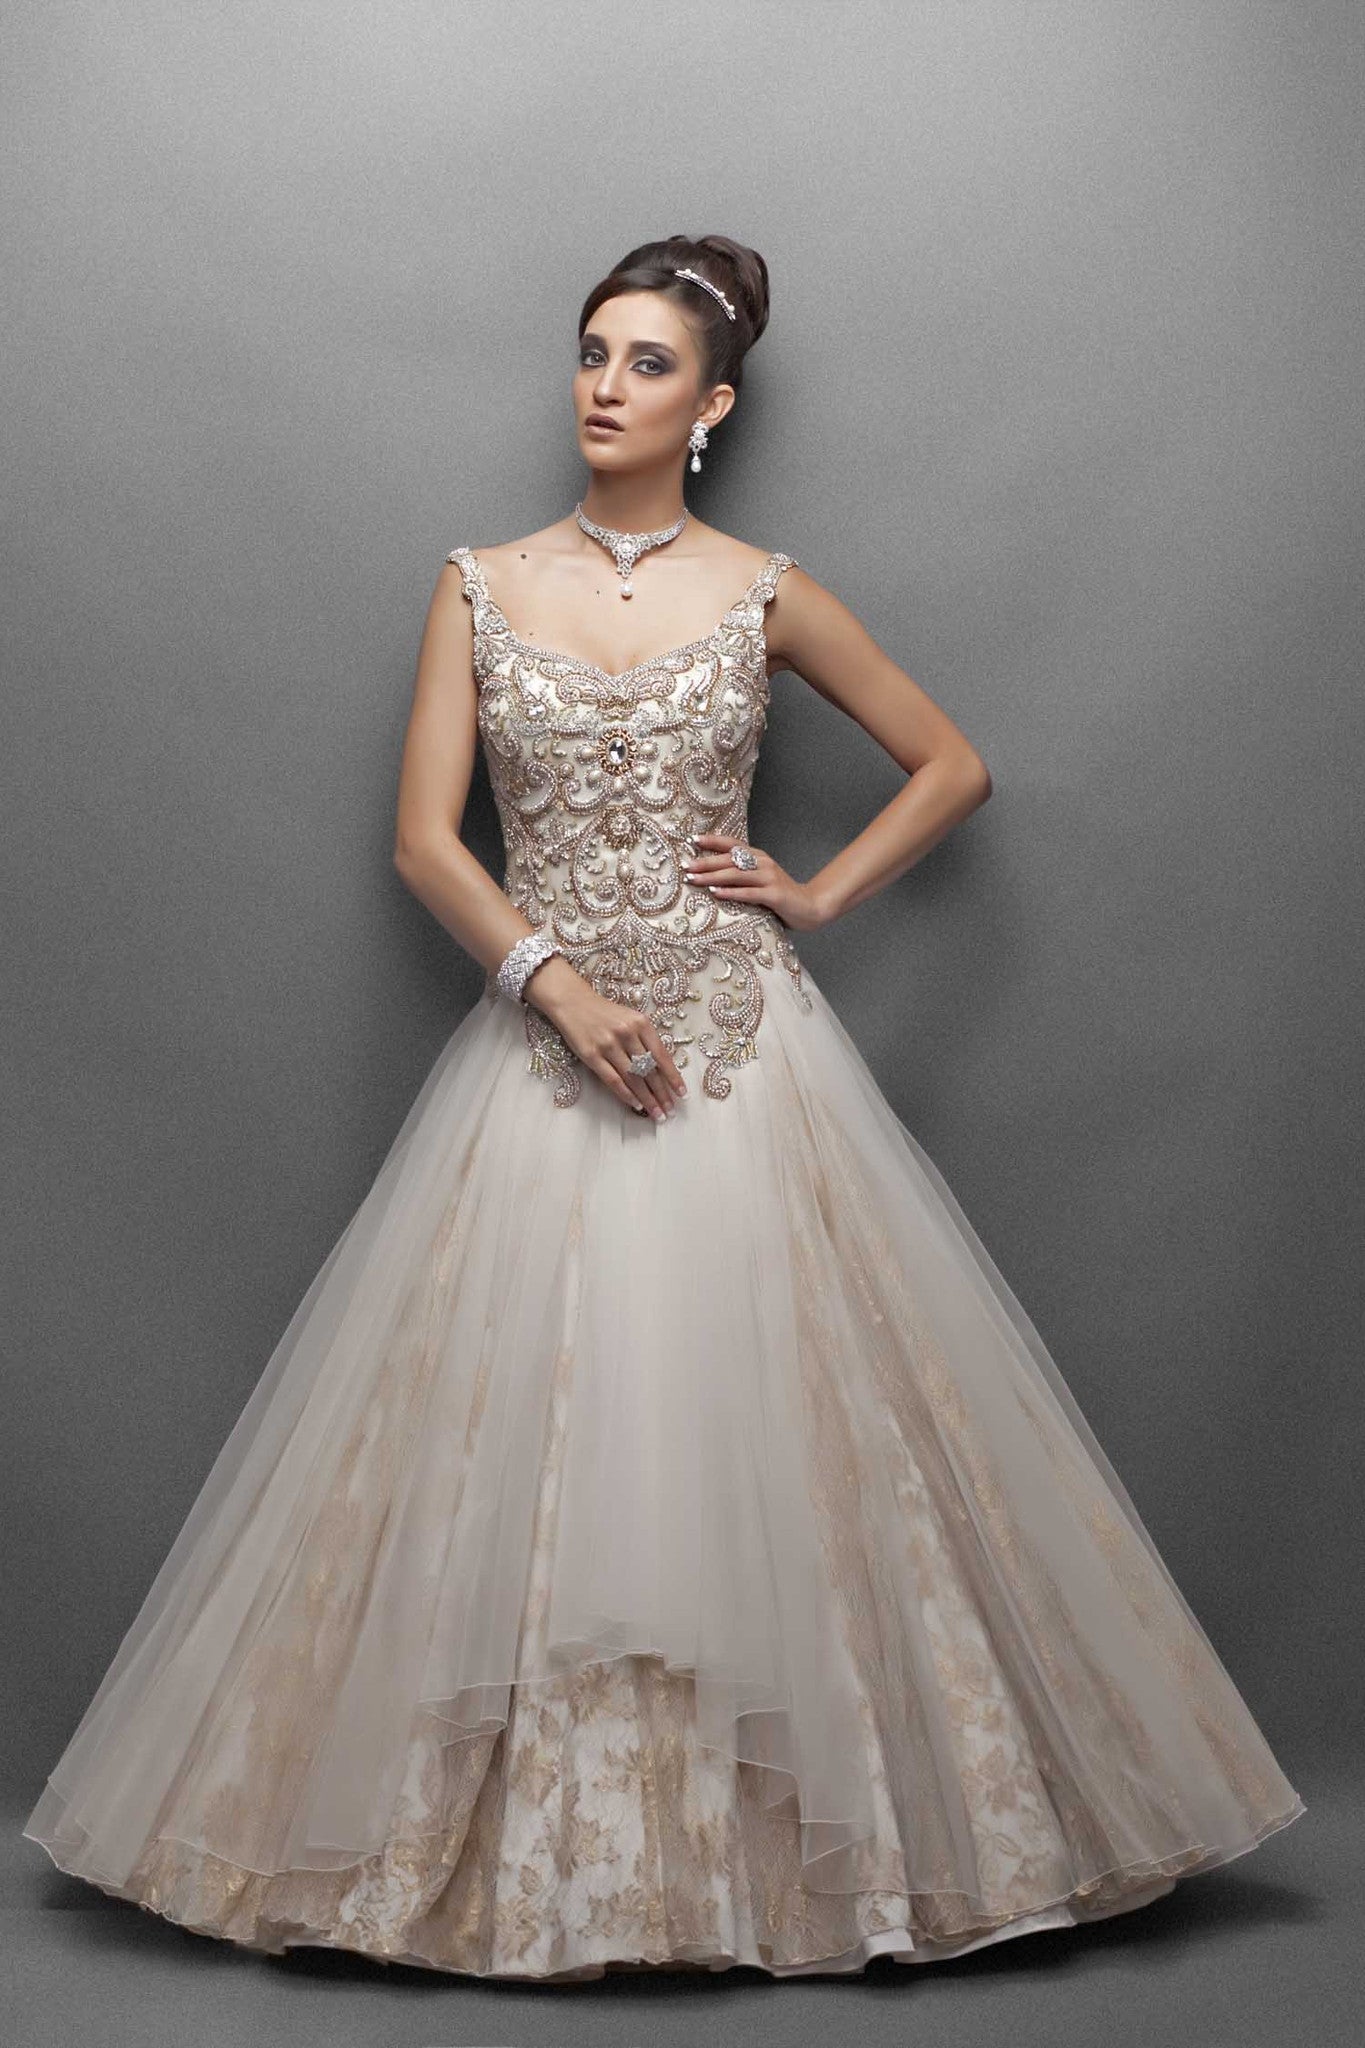 Offwhite color Indo western bridal gown – Panache Haute Couture